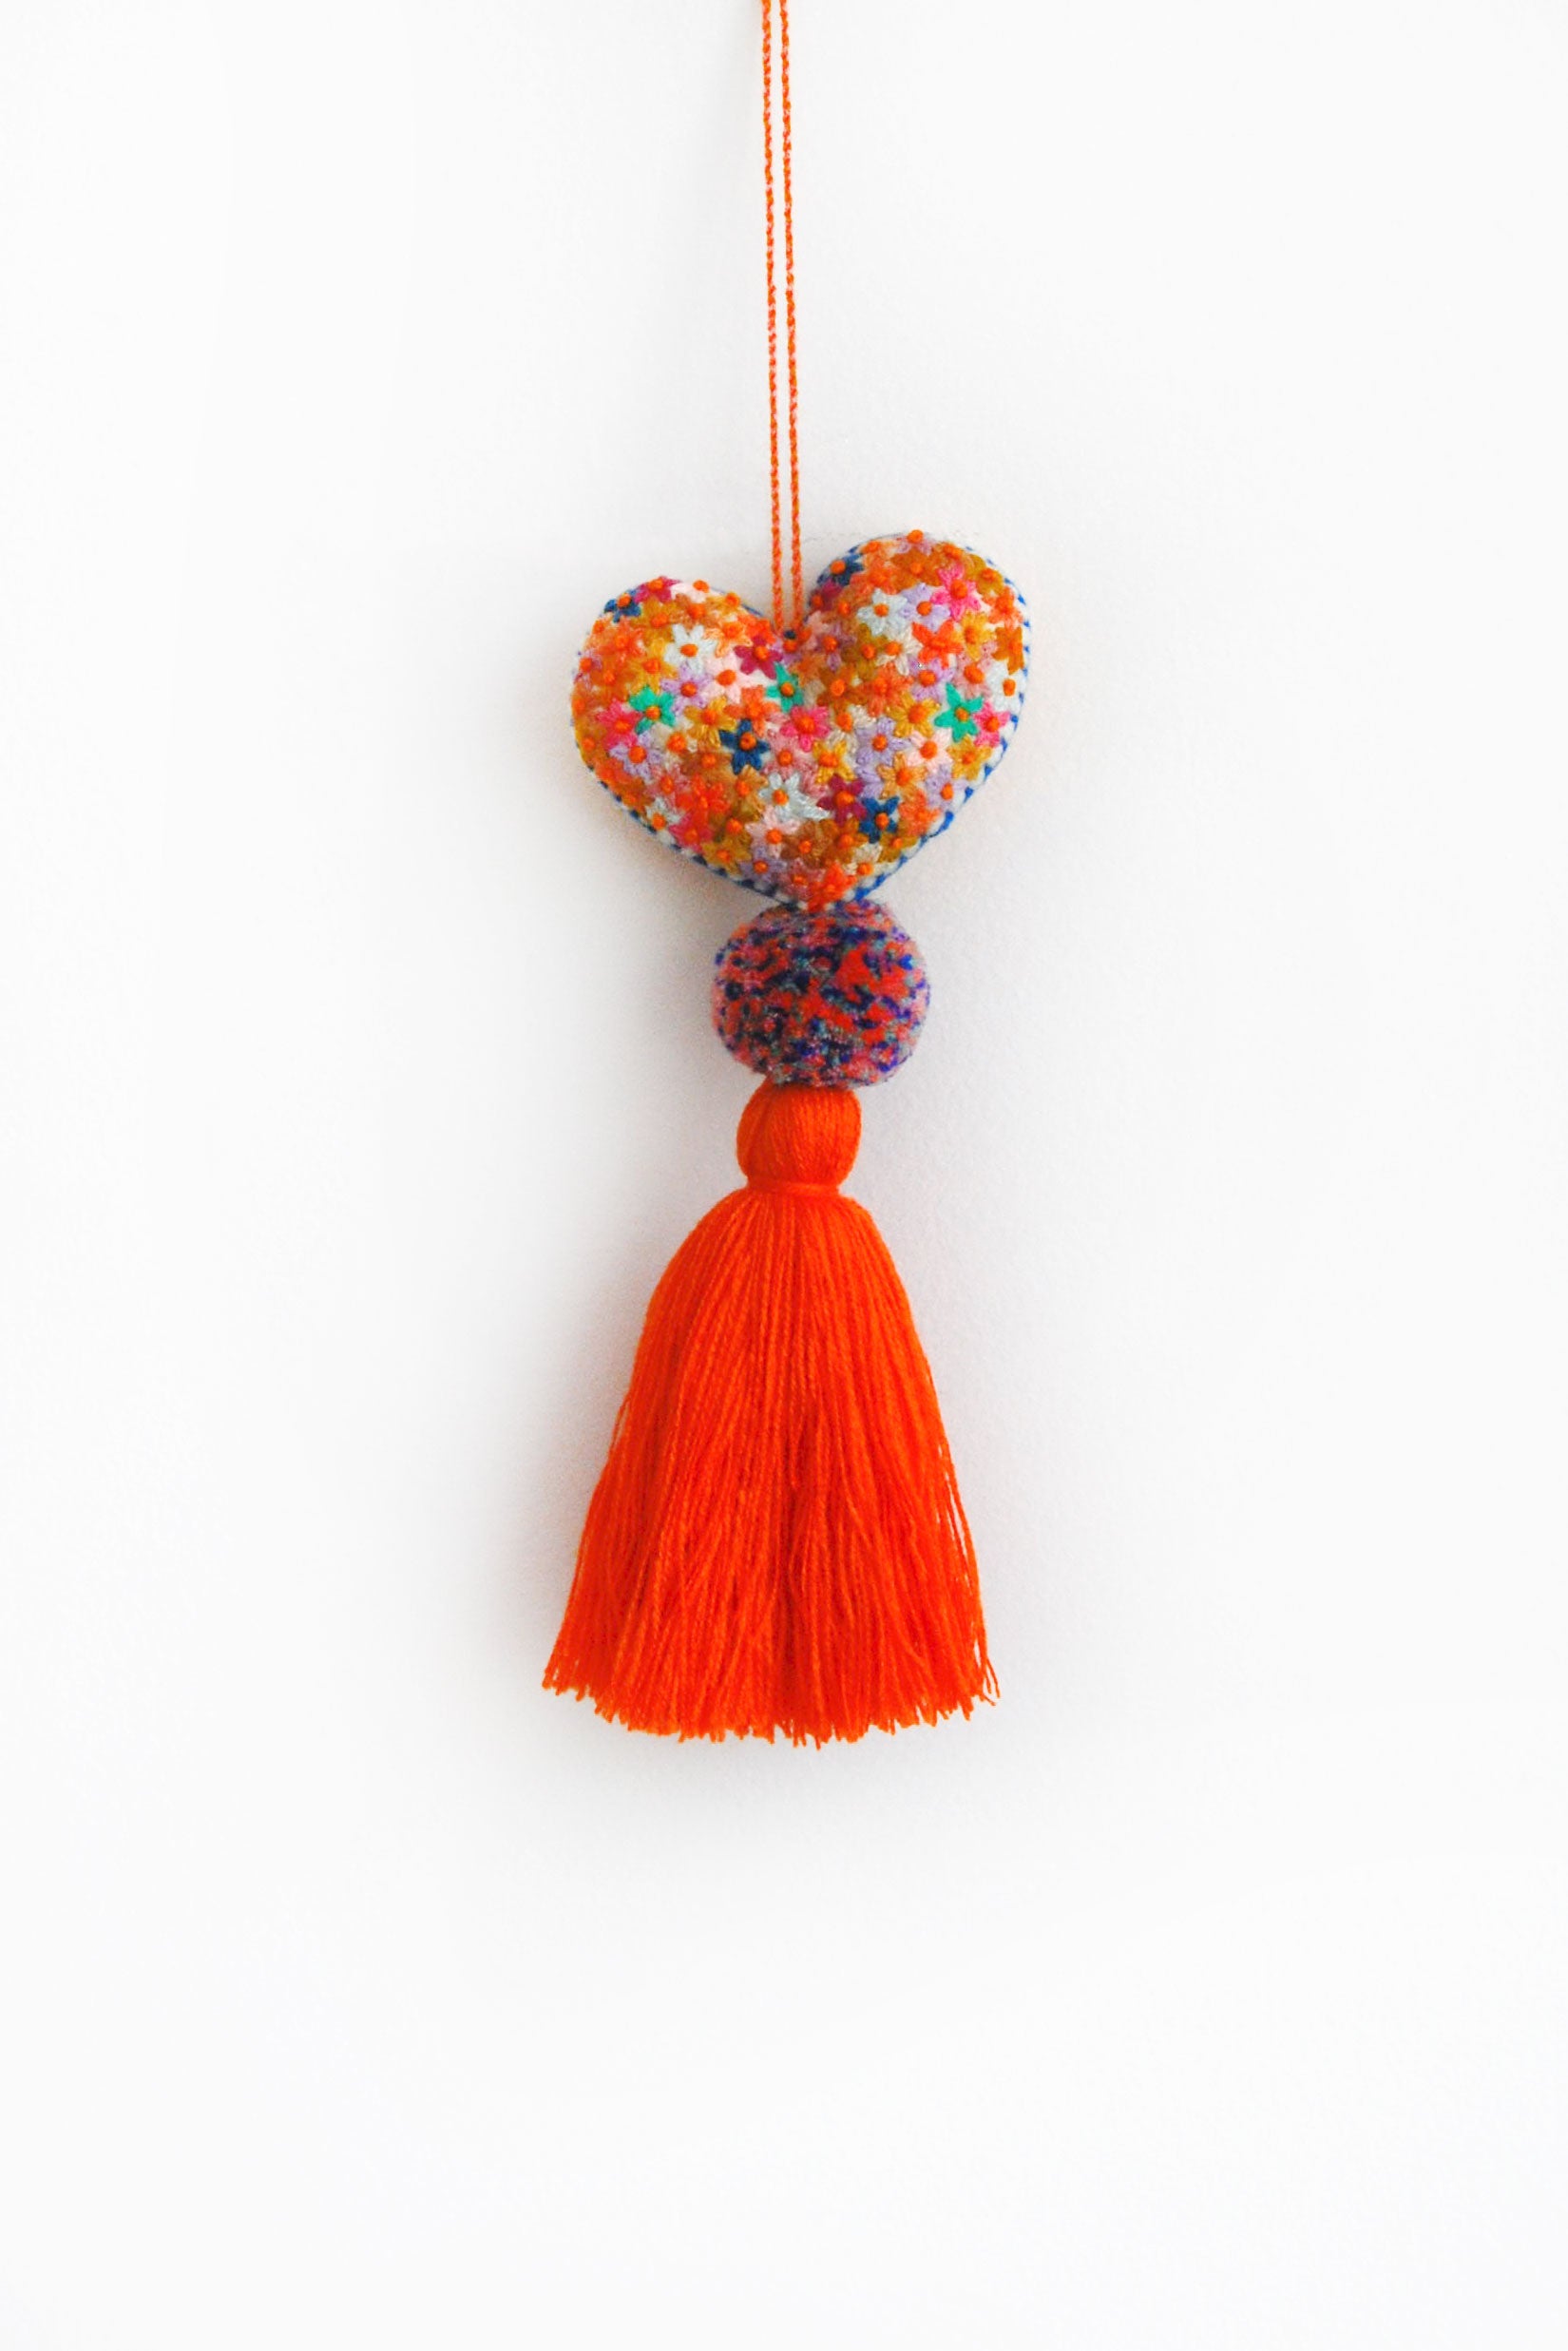 A colorful plush felt heart adorned with flower embroidery attached by multicolor speckled pom poms to a tassel in a bright orange color. The heart is hanging from a string attached to the top of it.